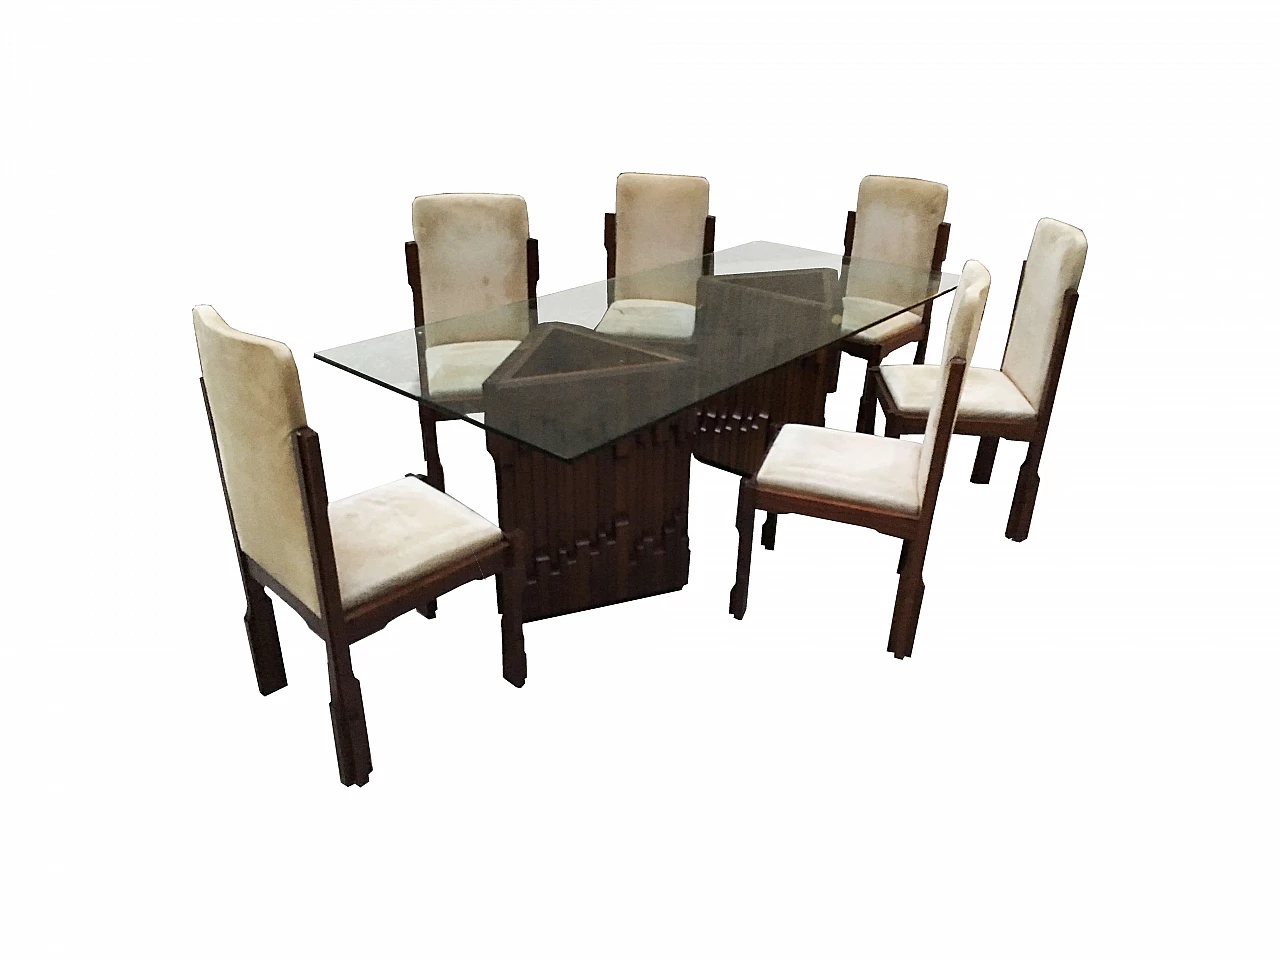 Vintage Italian Norman Dining Table Set by Luciano Frigerio for Frigerio - Desio 1062768